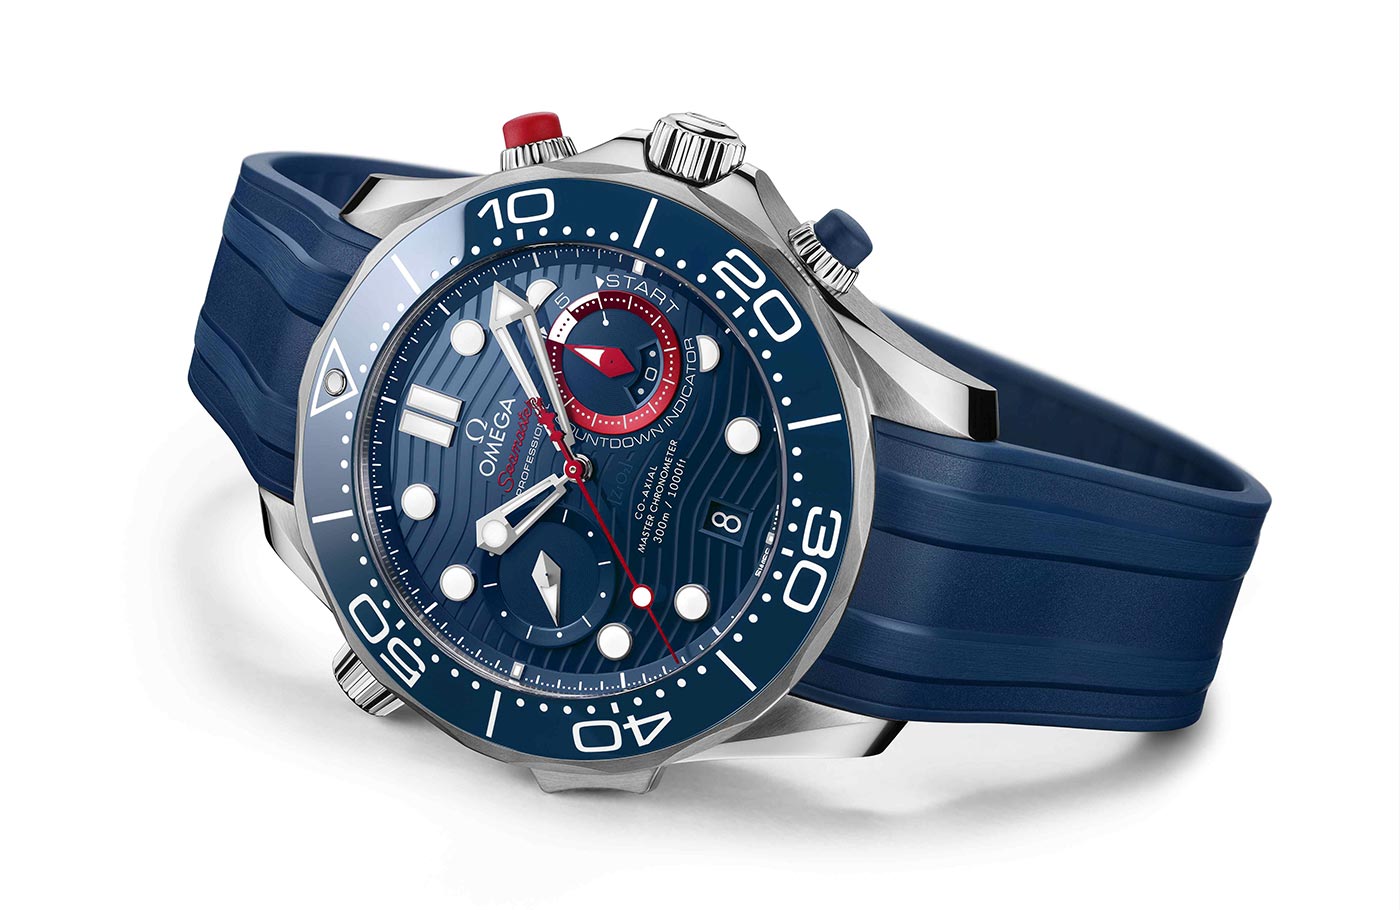 OMEGA Seamaster Diver 300M-America’s-Cup-Chronograph 210.30.44.51.03.002